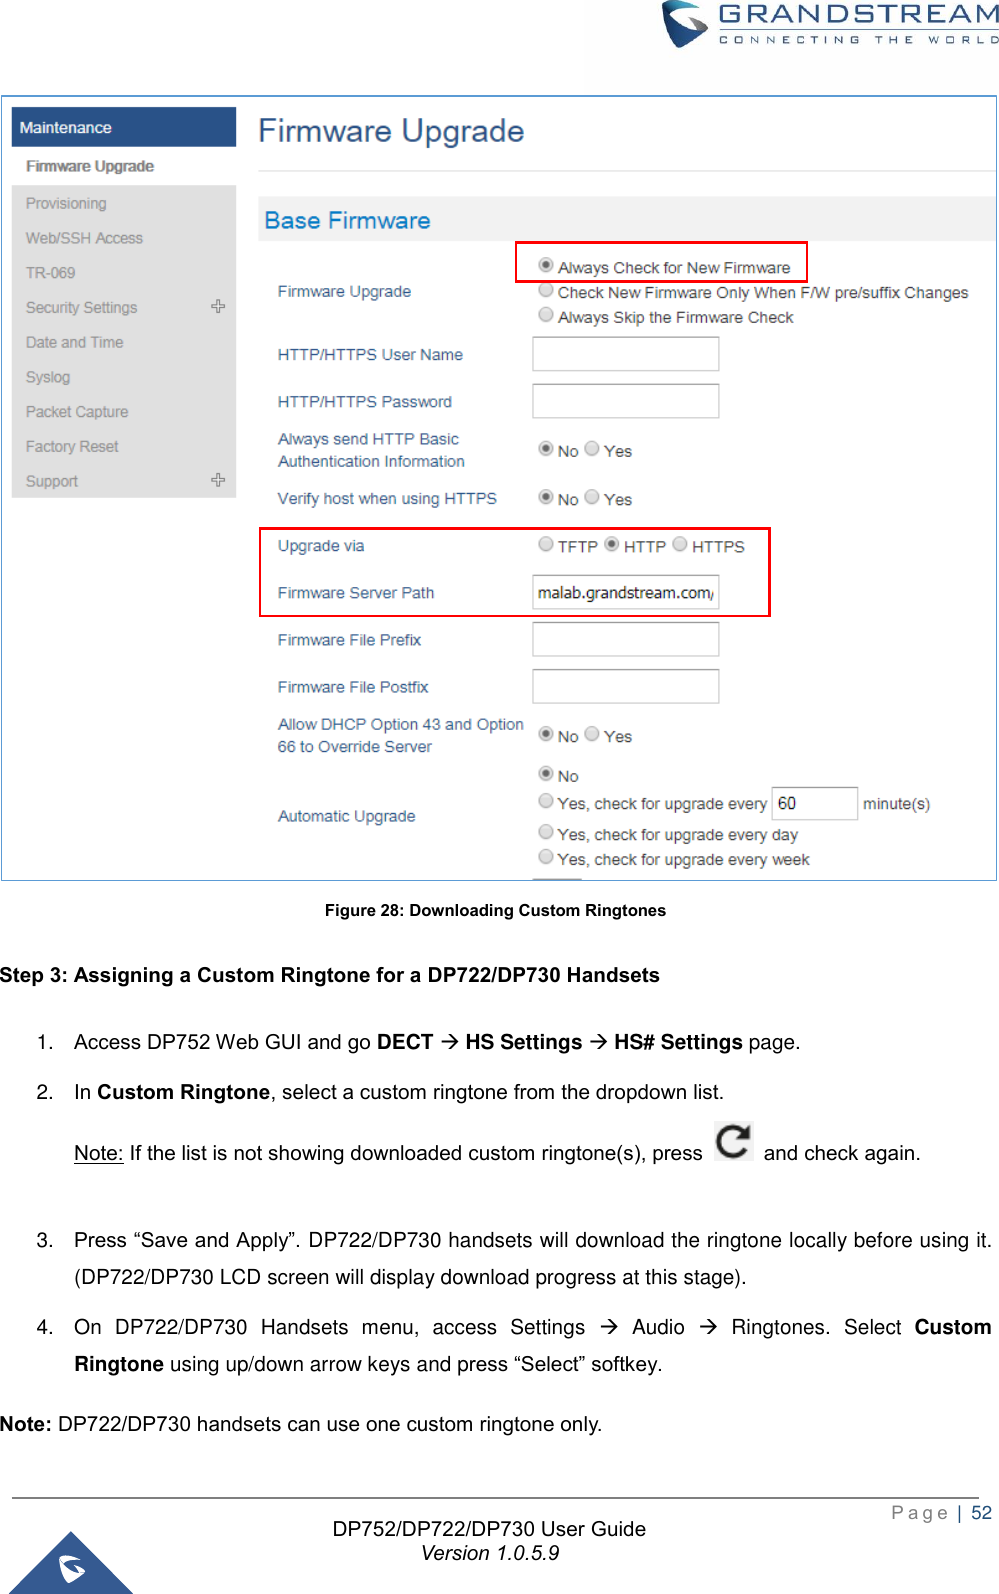  P a g e  |  52   DP752/DP722/DP730 User Guide Version 1.0.5.9    Figure 28: Downloading Custom Ringtones  Step 3: Assigning a Custom Ringtone for a DP722/DP730 Handsets  1. Access DP752 Web GUI and go DECT → HS Settings → HS# Settings page. 2. In Custom Ringtone, select a custom ringtone from the dropdown list. Note: If the list is not showing downloaded custom ringtone(s), press    and check again.  3. Press “Save and Apply”. DP722/DP730 handsets will download the ringtone locally before using it. (DP722/DP730 LCD screen will display download progress at this stage).   4.  On  DP722/DP730  Handsets  menu,  access  Settings  →  Audio  →  Ringtones.  Select  Custom Ringtone using up/down arrow keys and press “Select” softkey.   Note: DP722/DP730 handsets can use one custom ringtone only.   